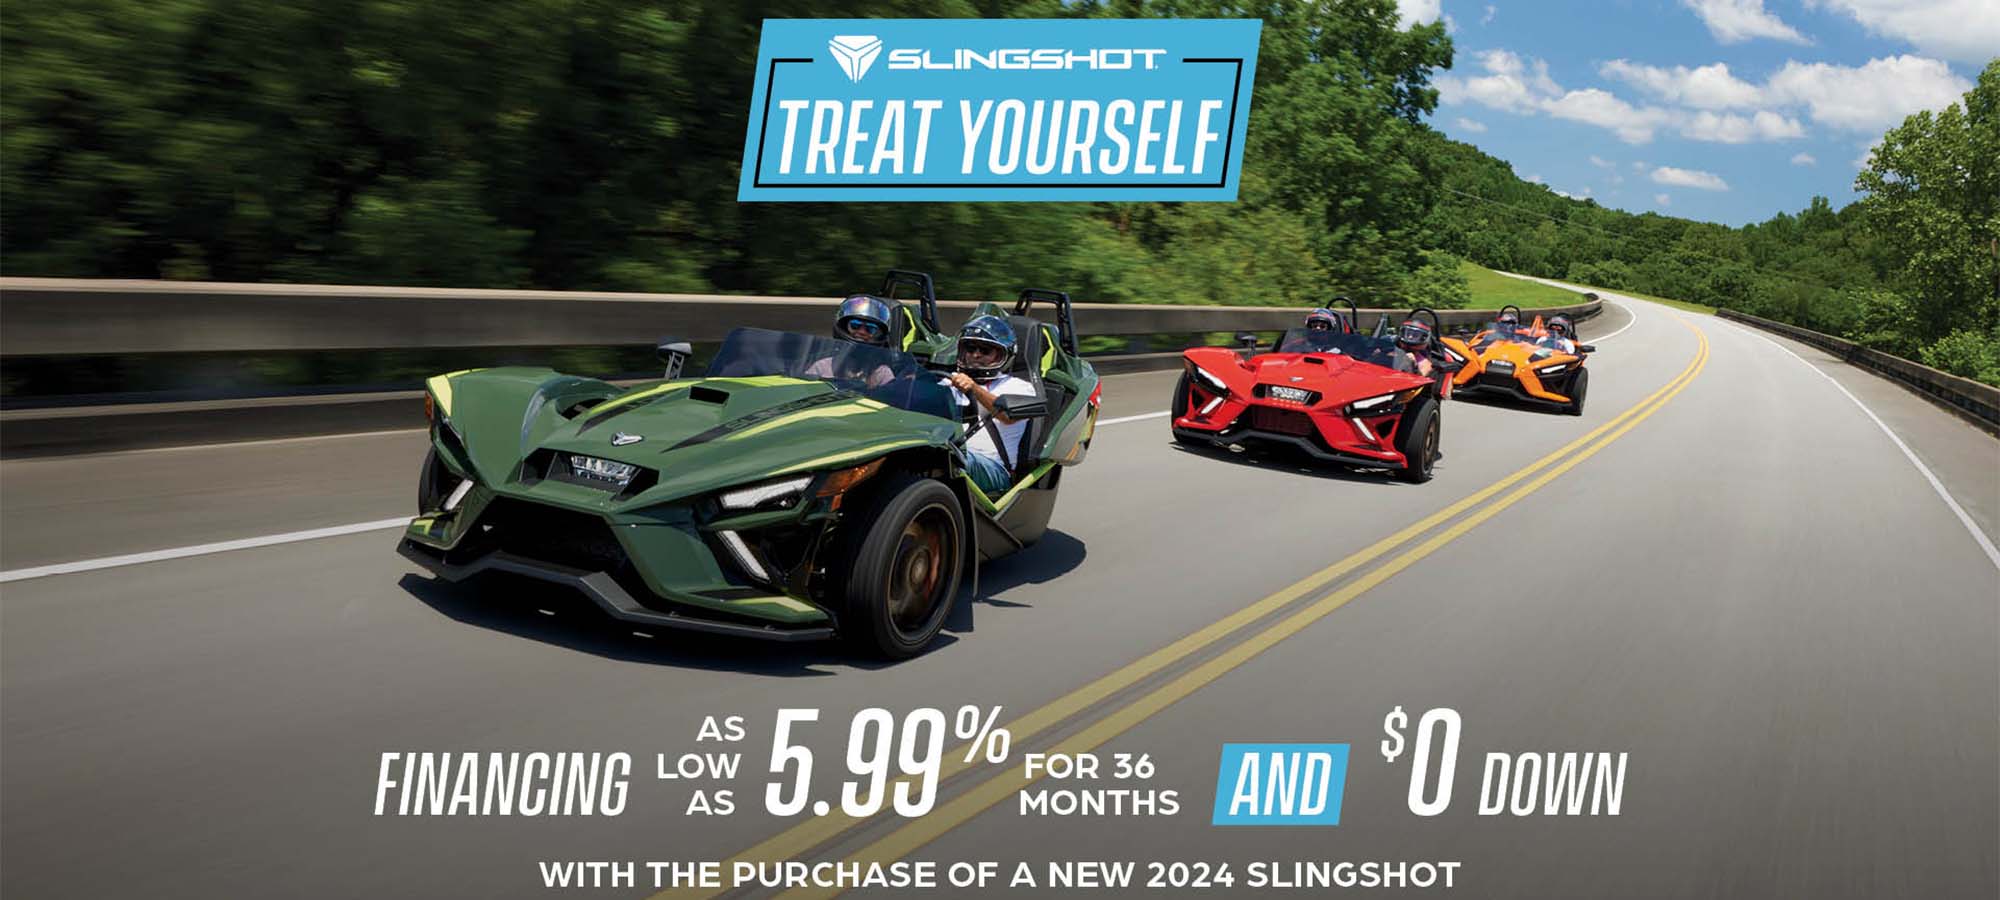 Slingshot US - Treat Yourself - Financing 5.99% at Friendly Powersports Slidell